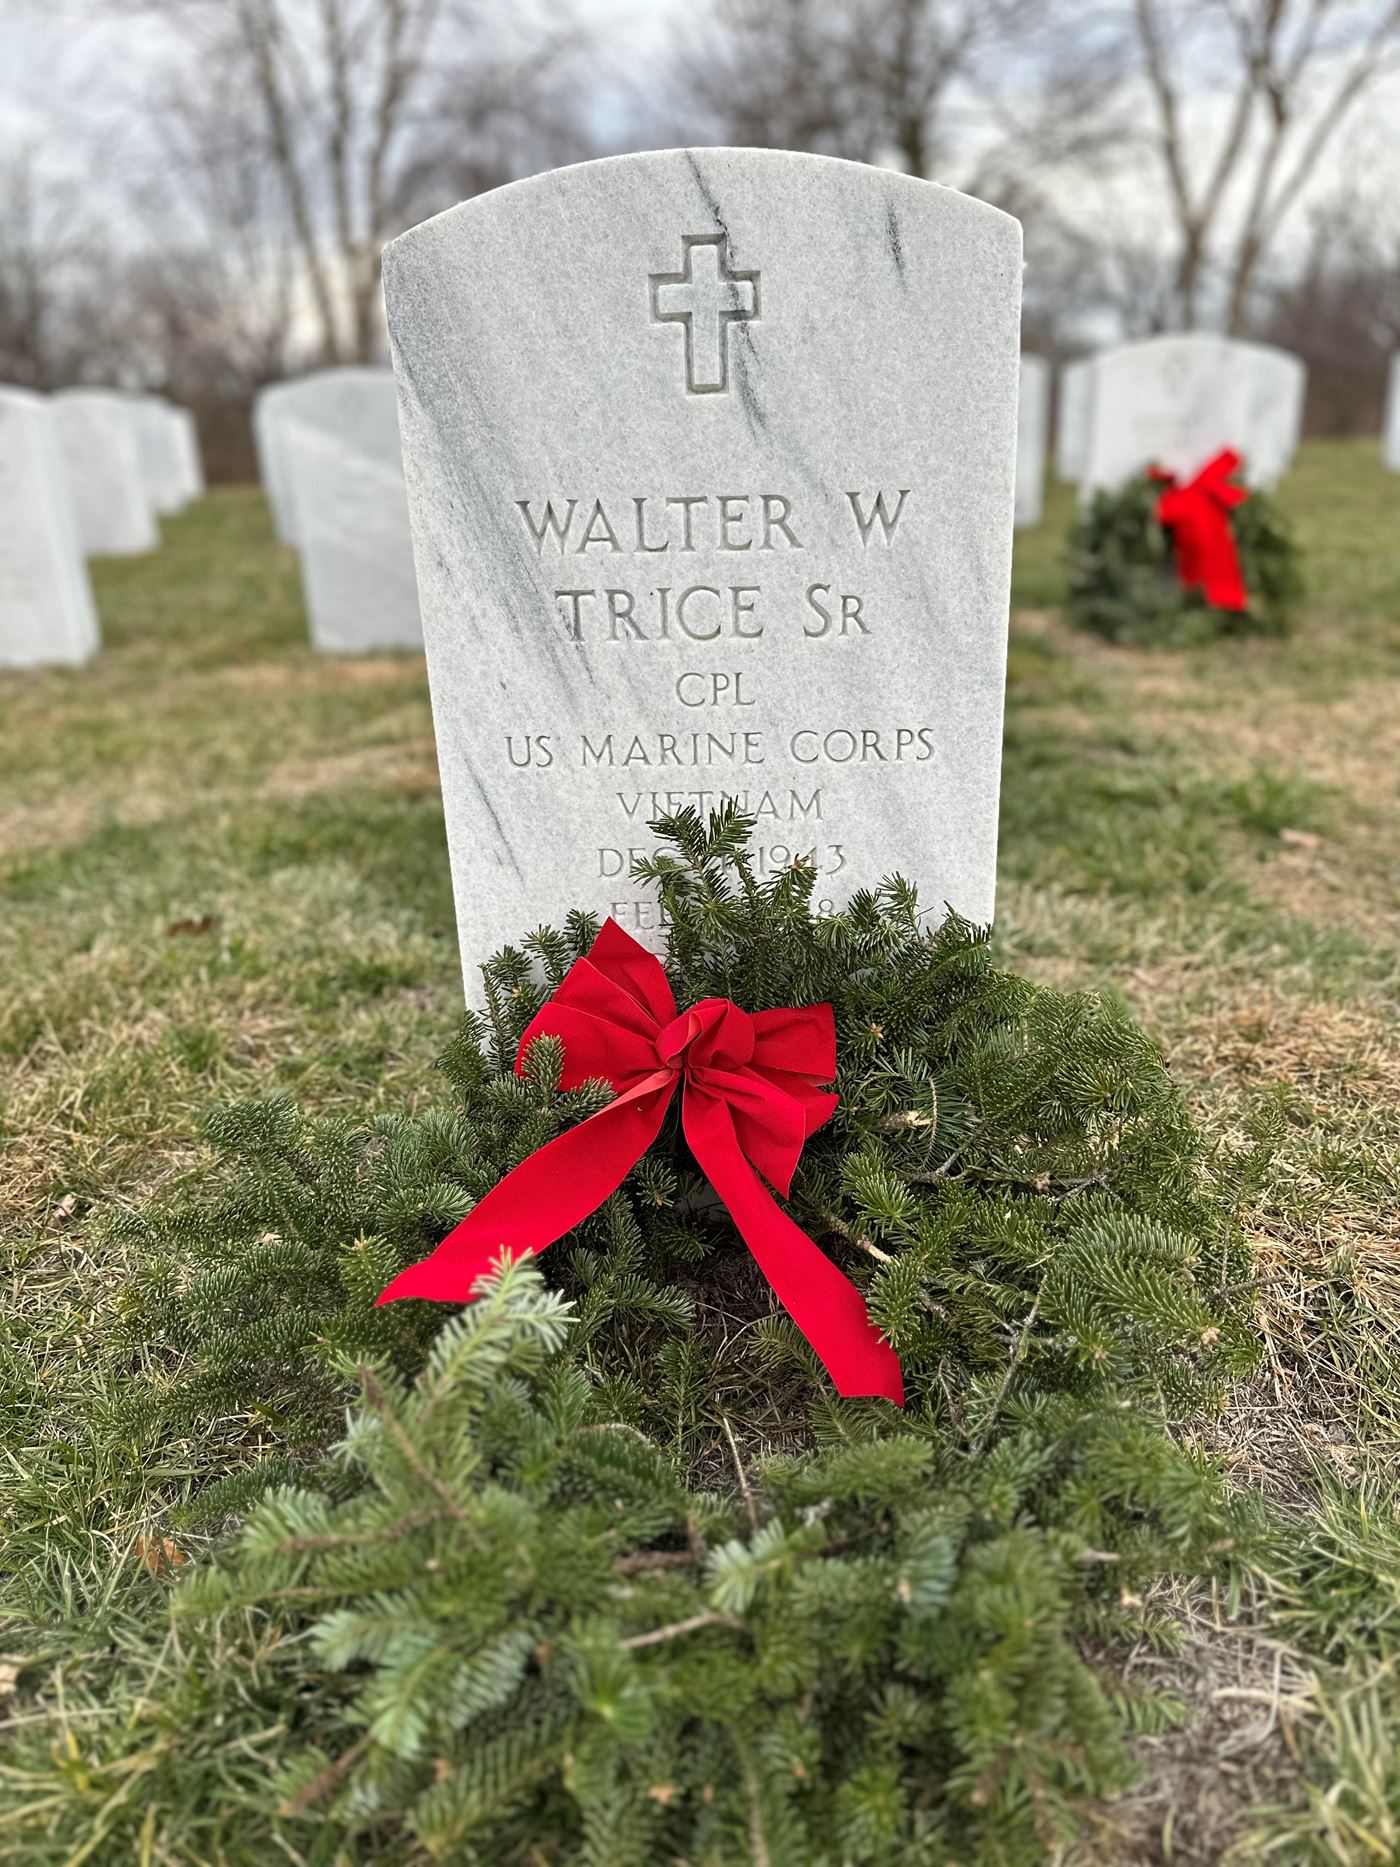 Thank you for your service Walter W. Trice, Sr.